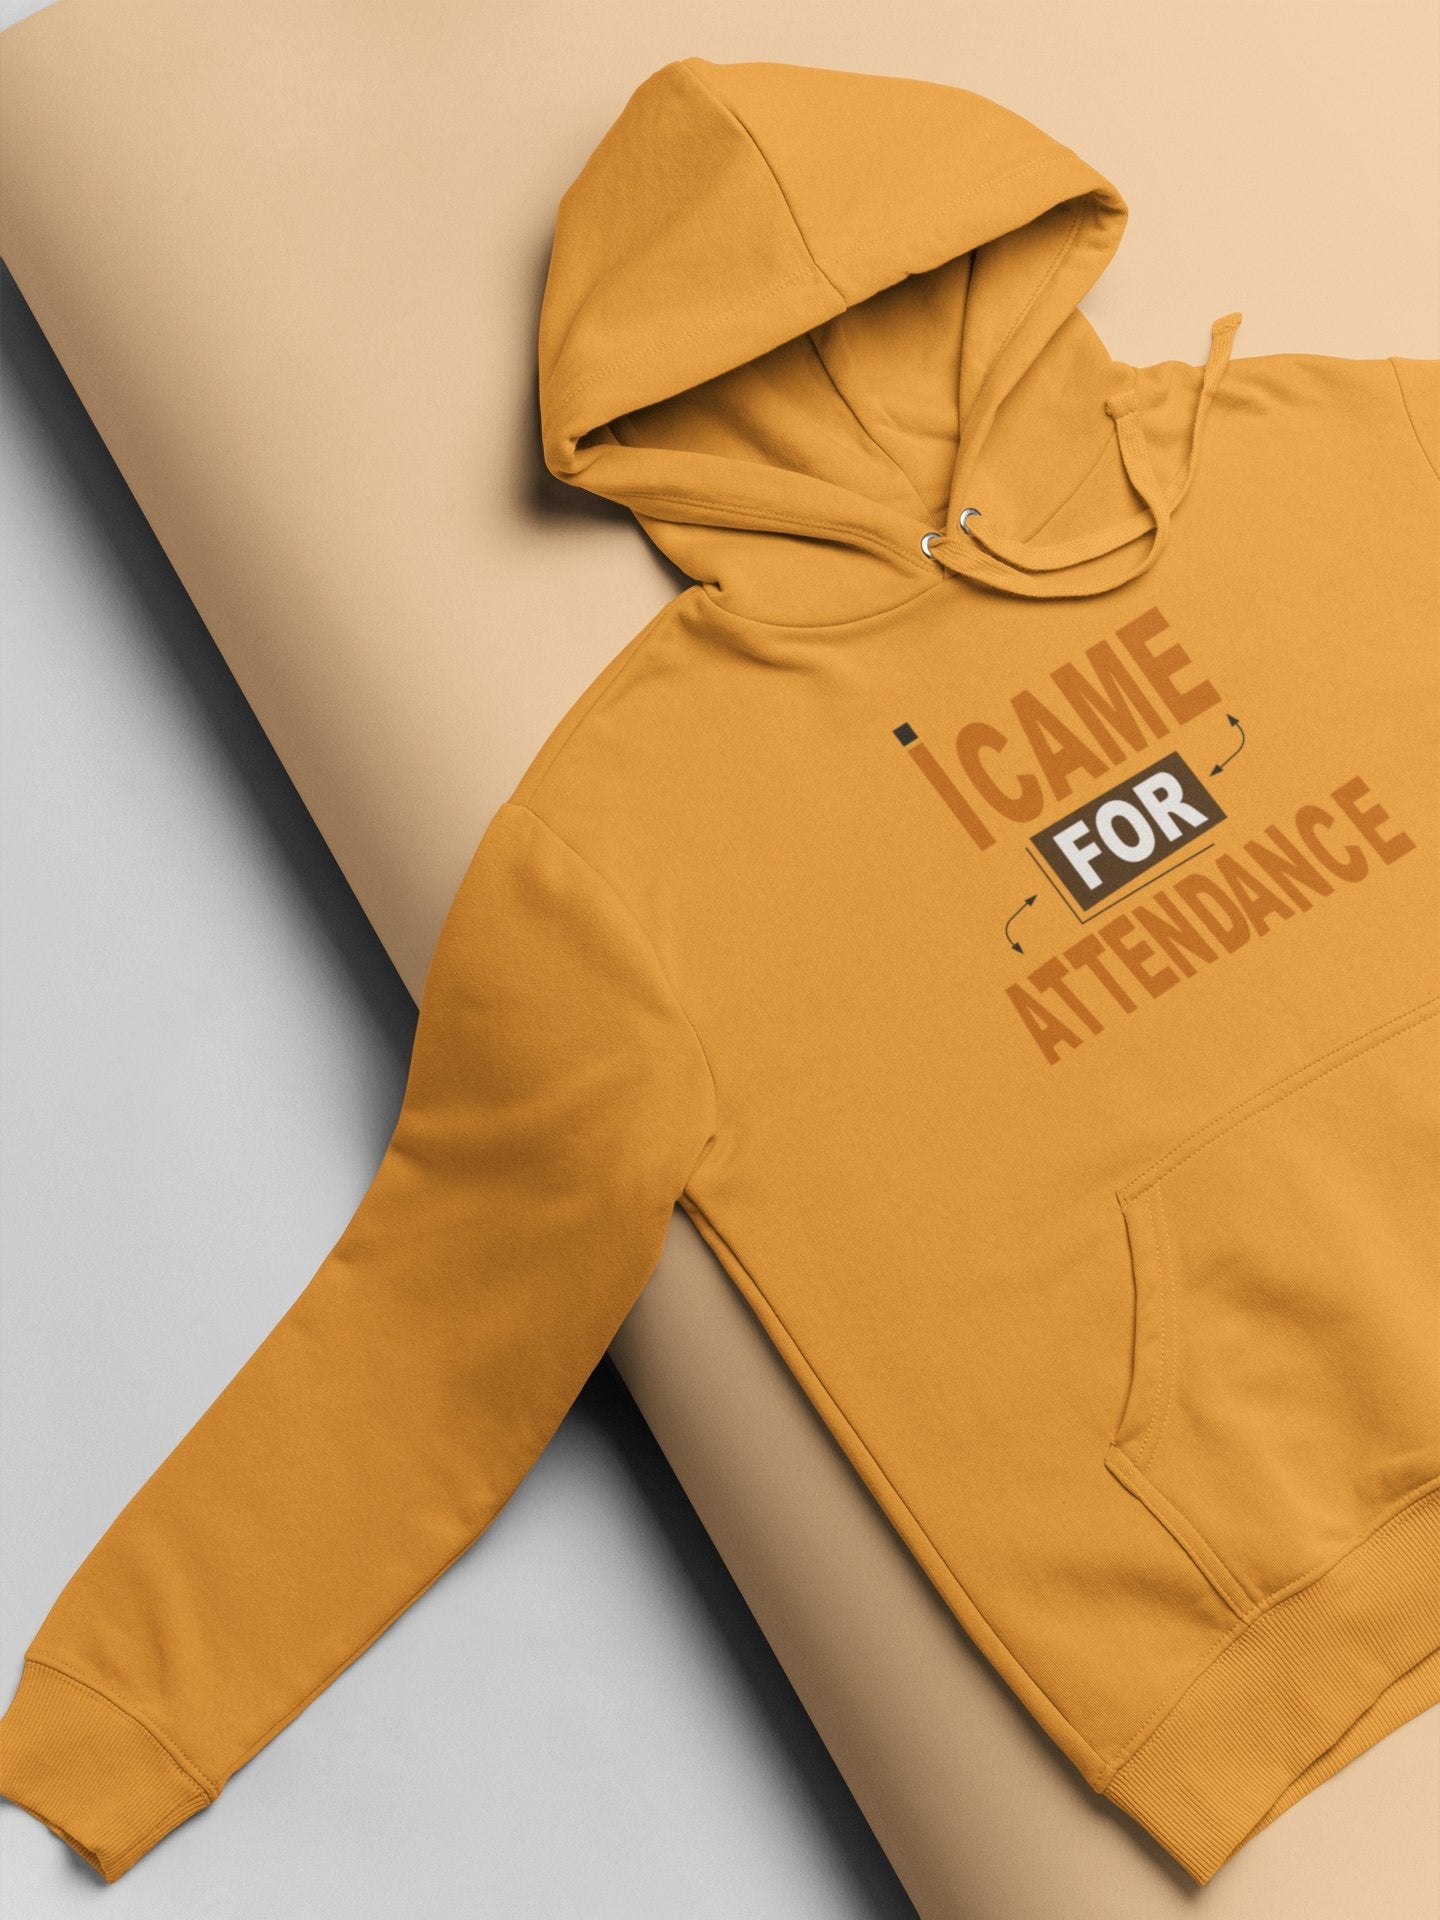 I Came For Attendance Engineering Hoodies for Women-FunkyTradition - Funky Tees Club